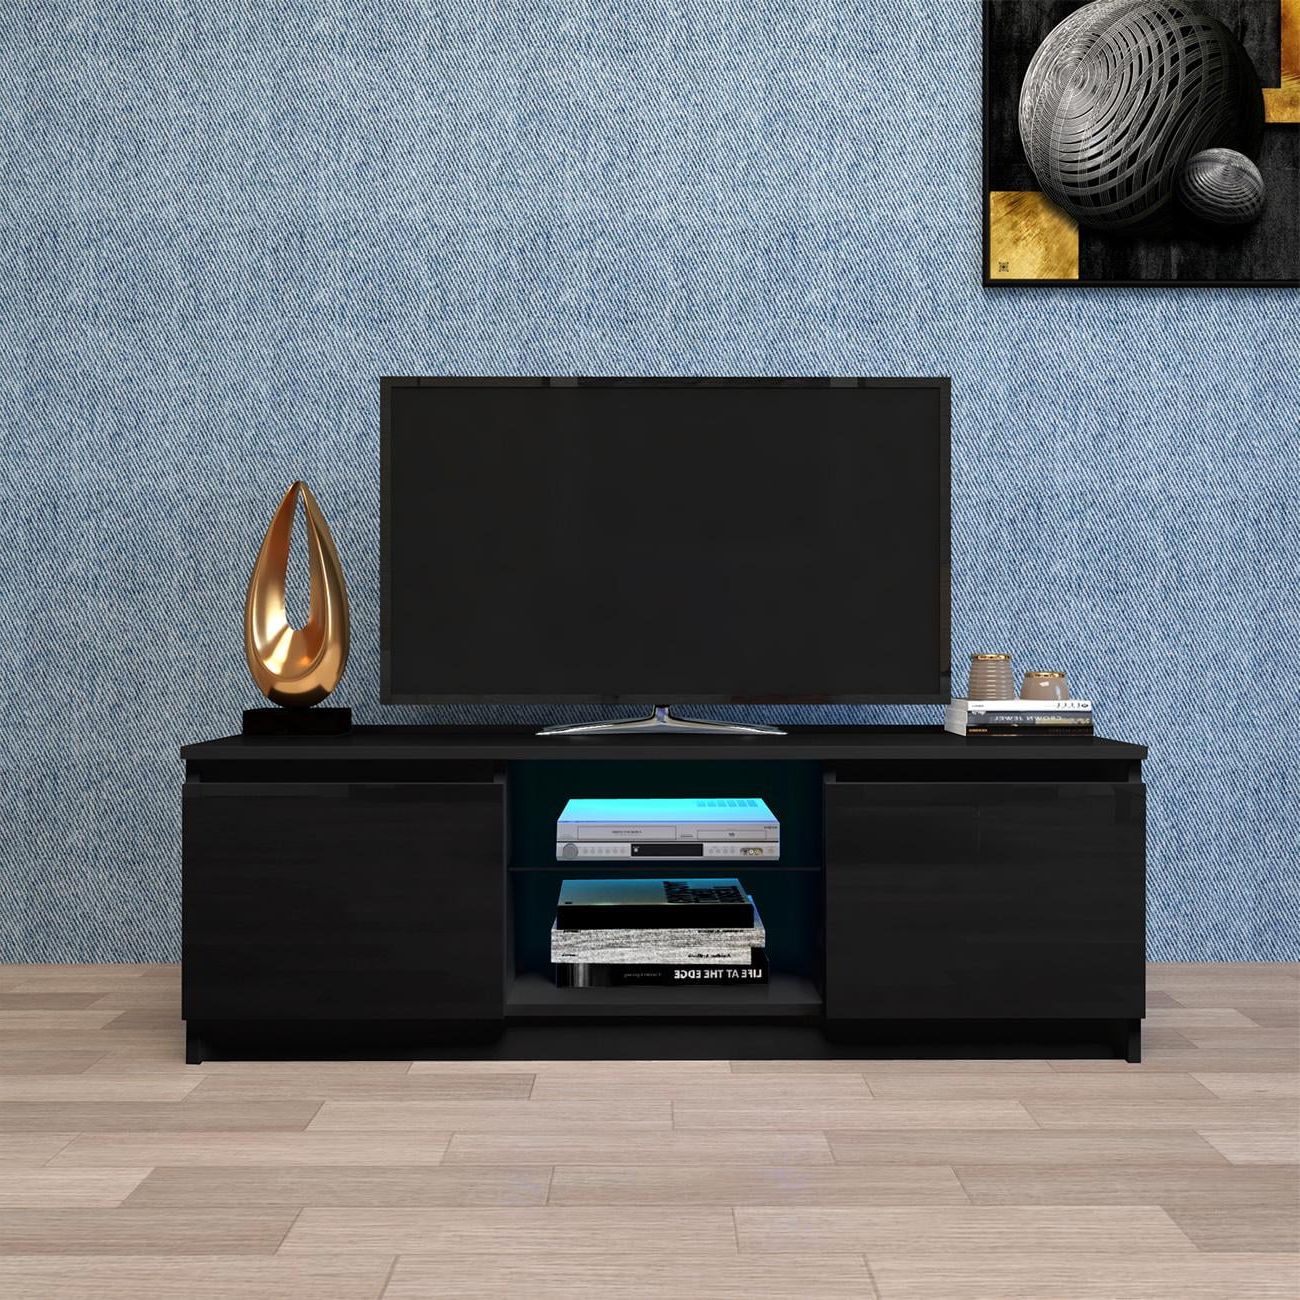 Tv Stand With Storage Drawers Shelves Led Rgb Lights, For Flat Tv 40 55 Within Latest Rgb Entertainment Centers Black (View 4 of 15)